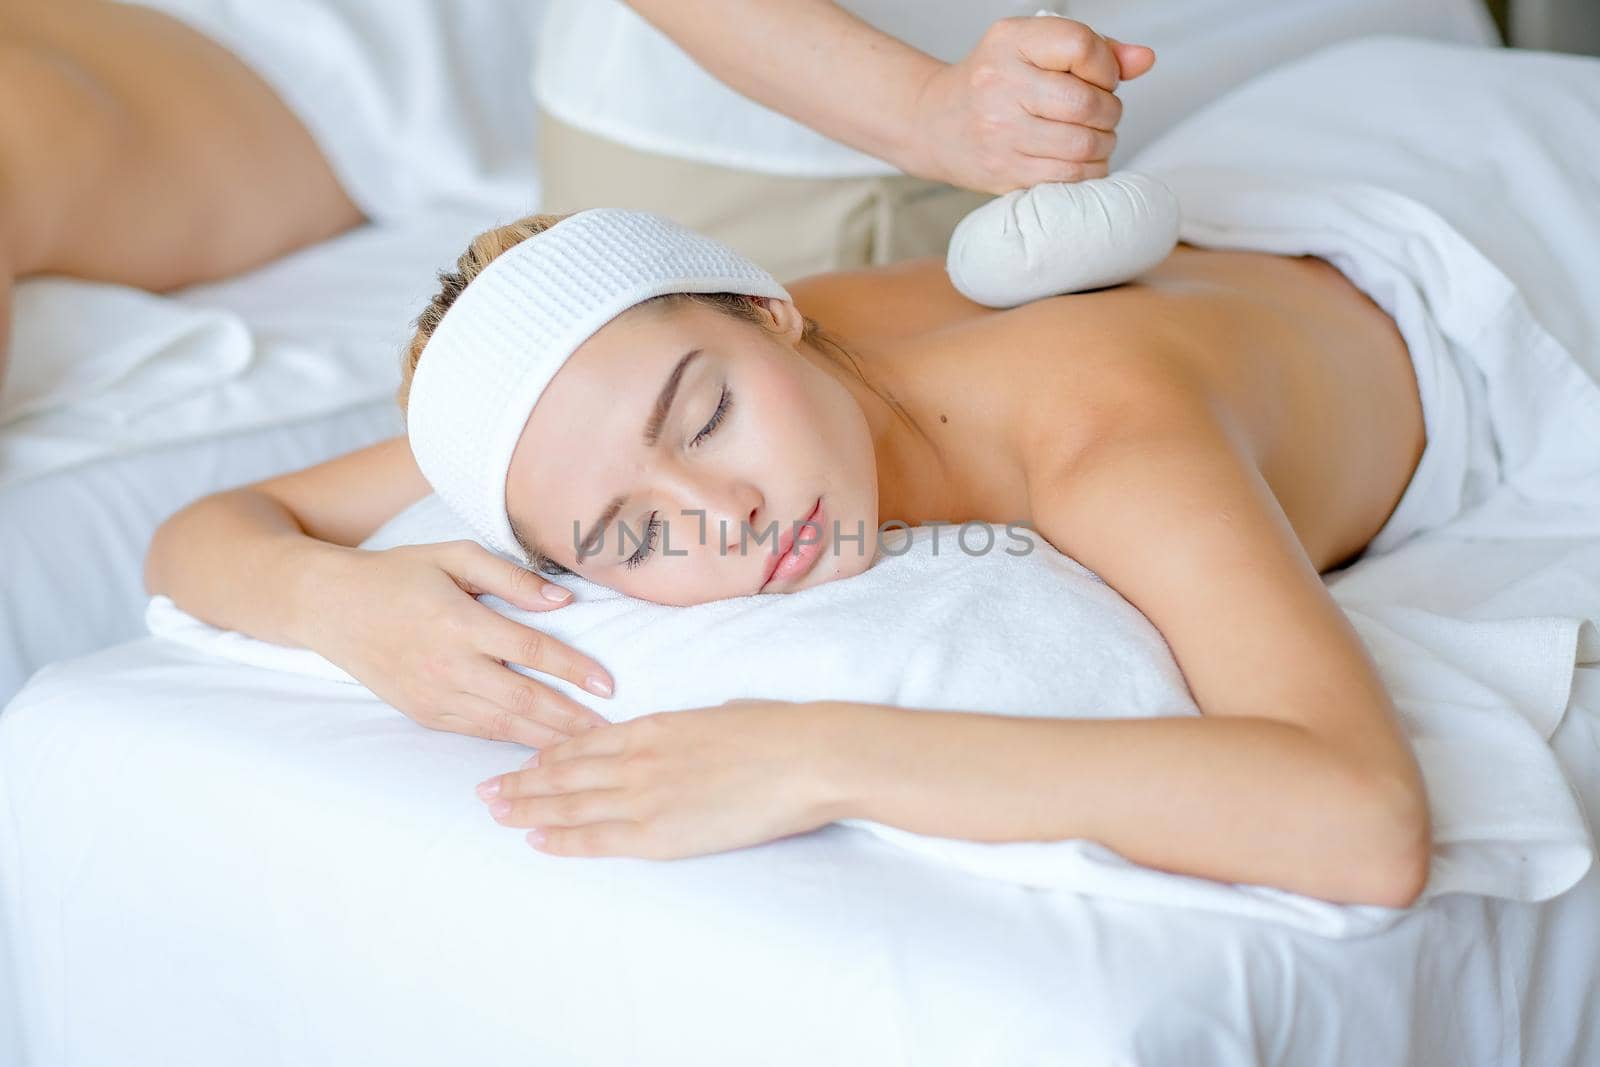 Young beautiful girl enjoy with massage by herbal ball on her back in spa room with day light.